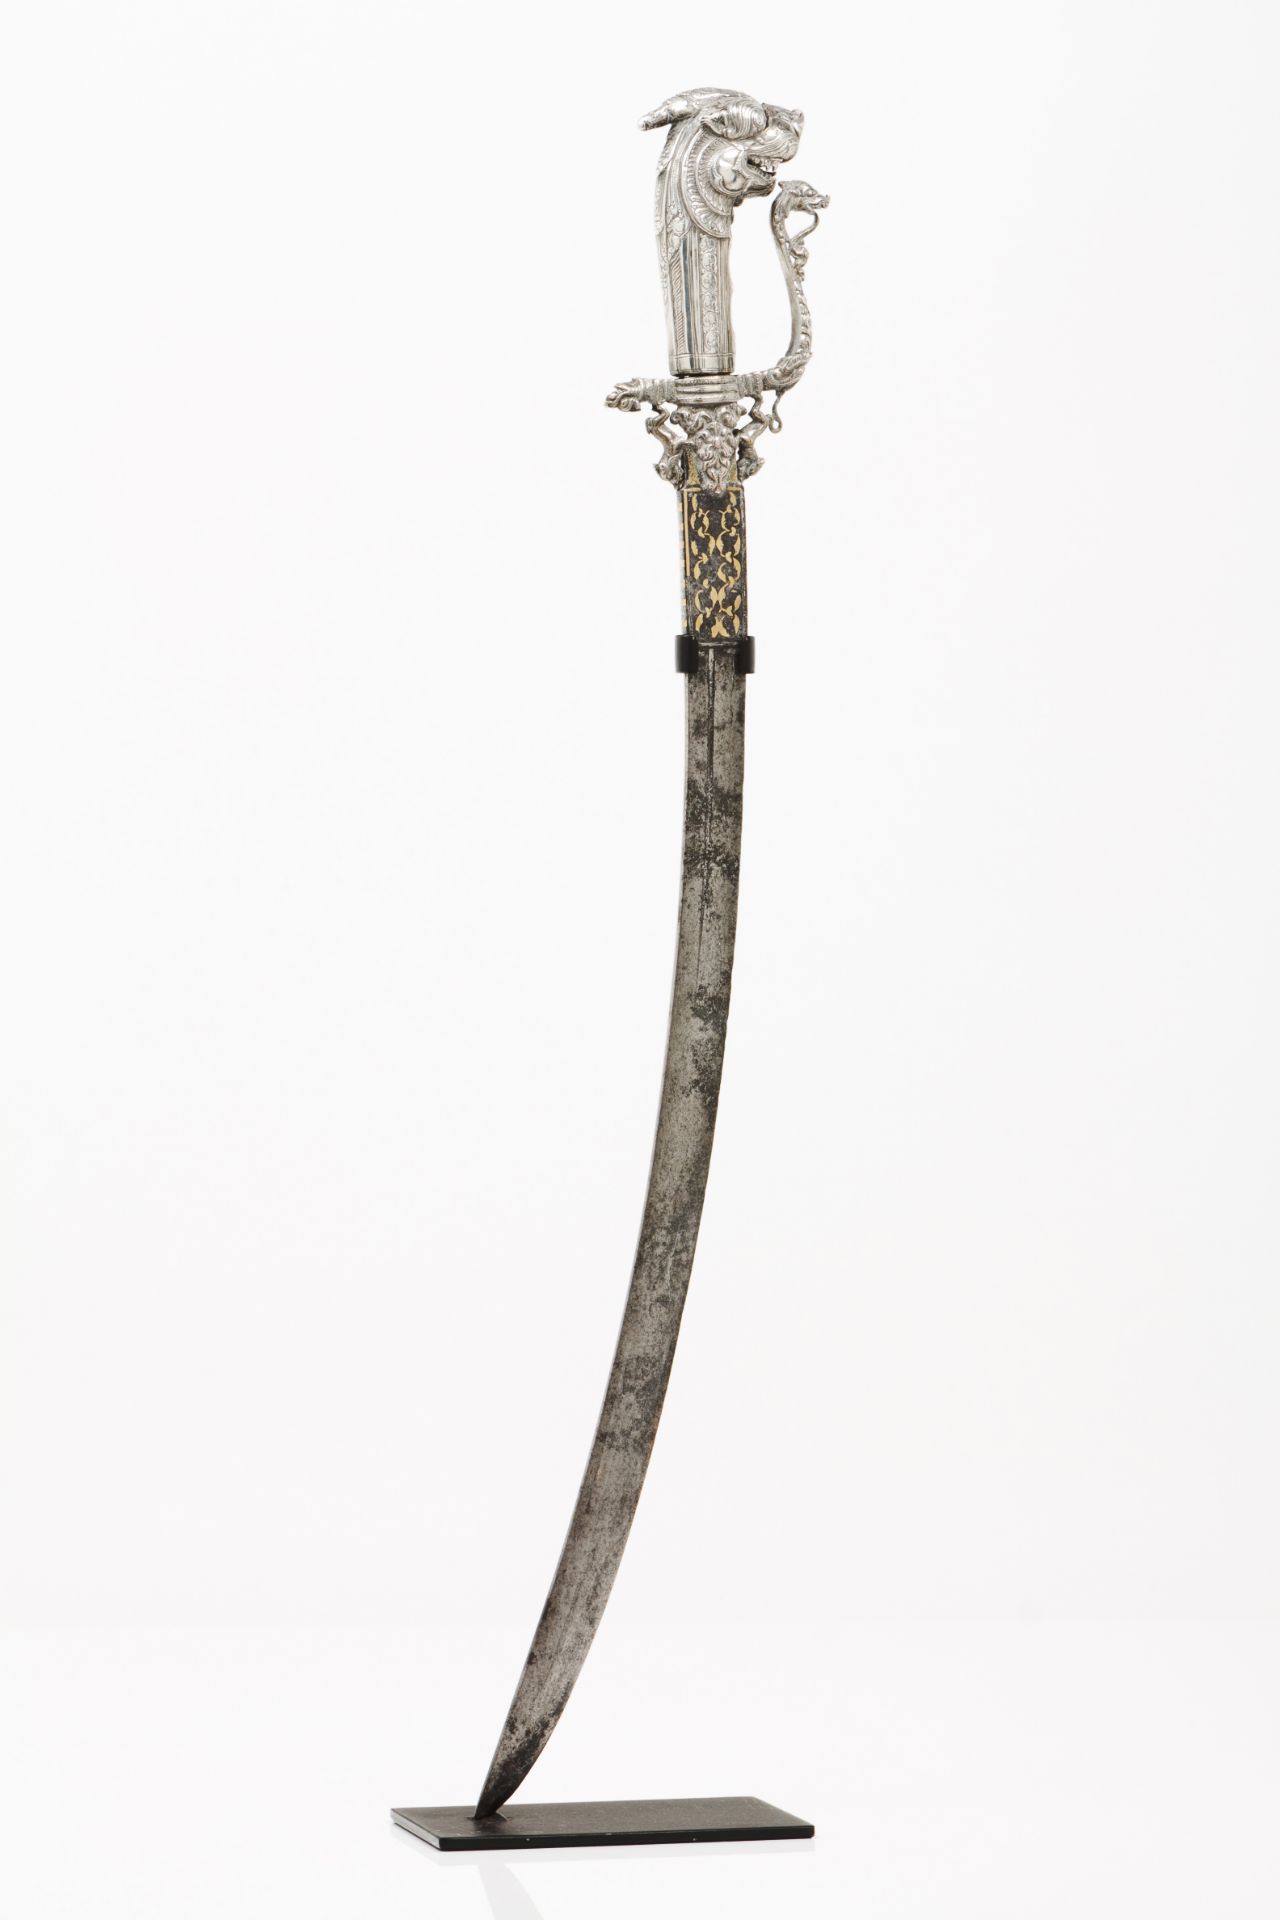 A Sinhalese sword - KastaneSilvered metal hilt of engraved and raised dragon's head Cross guard